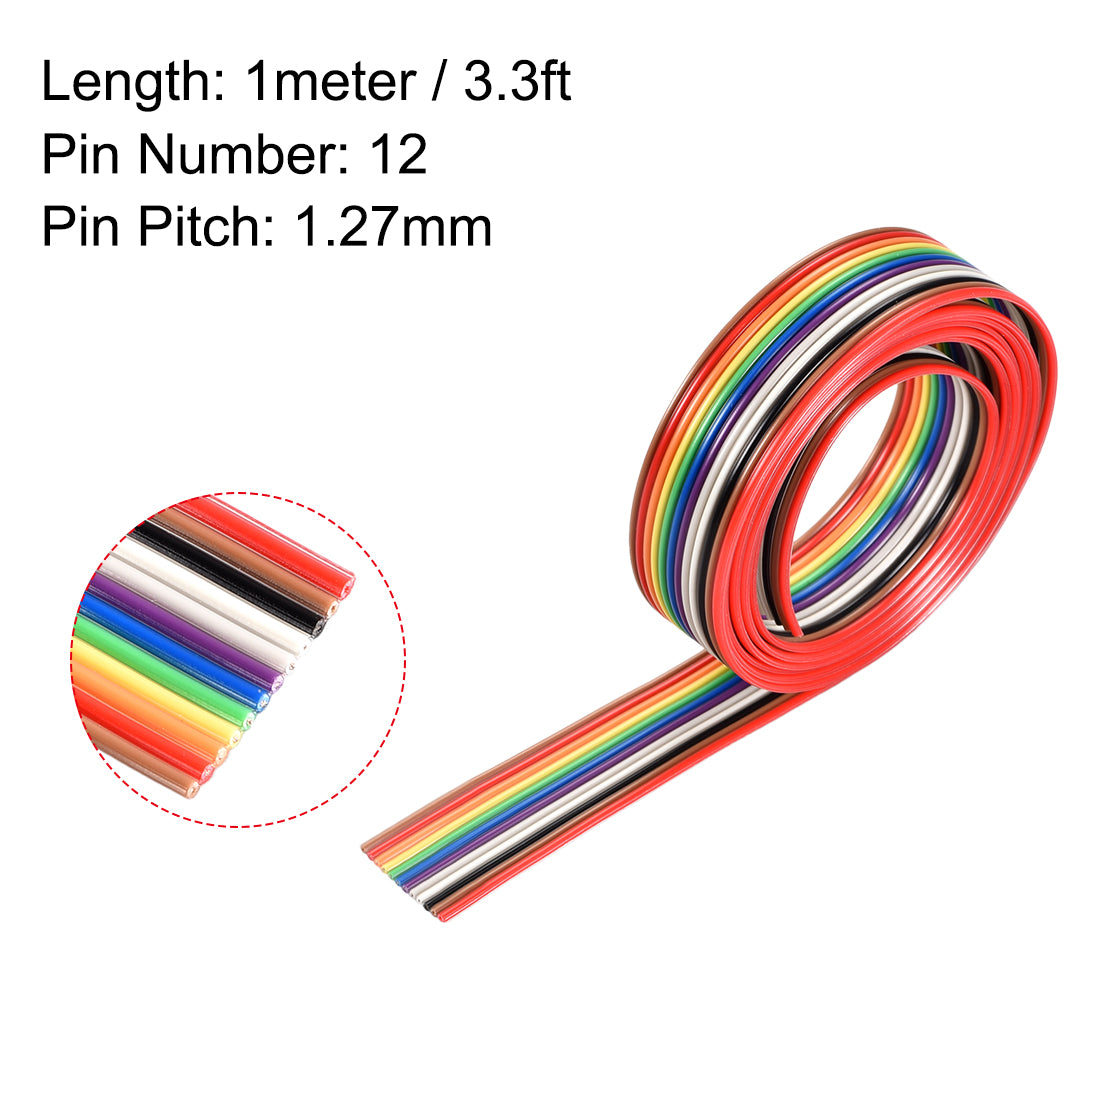 uxcell Uxcell IDC Rainbow Wire Flat Ribbon Cable 12P 1.27mm Pitch 1meter/3.3ft Length